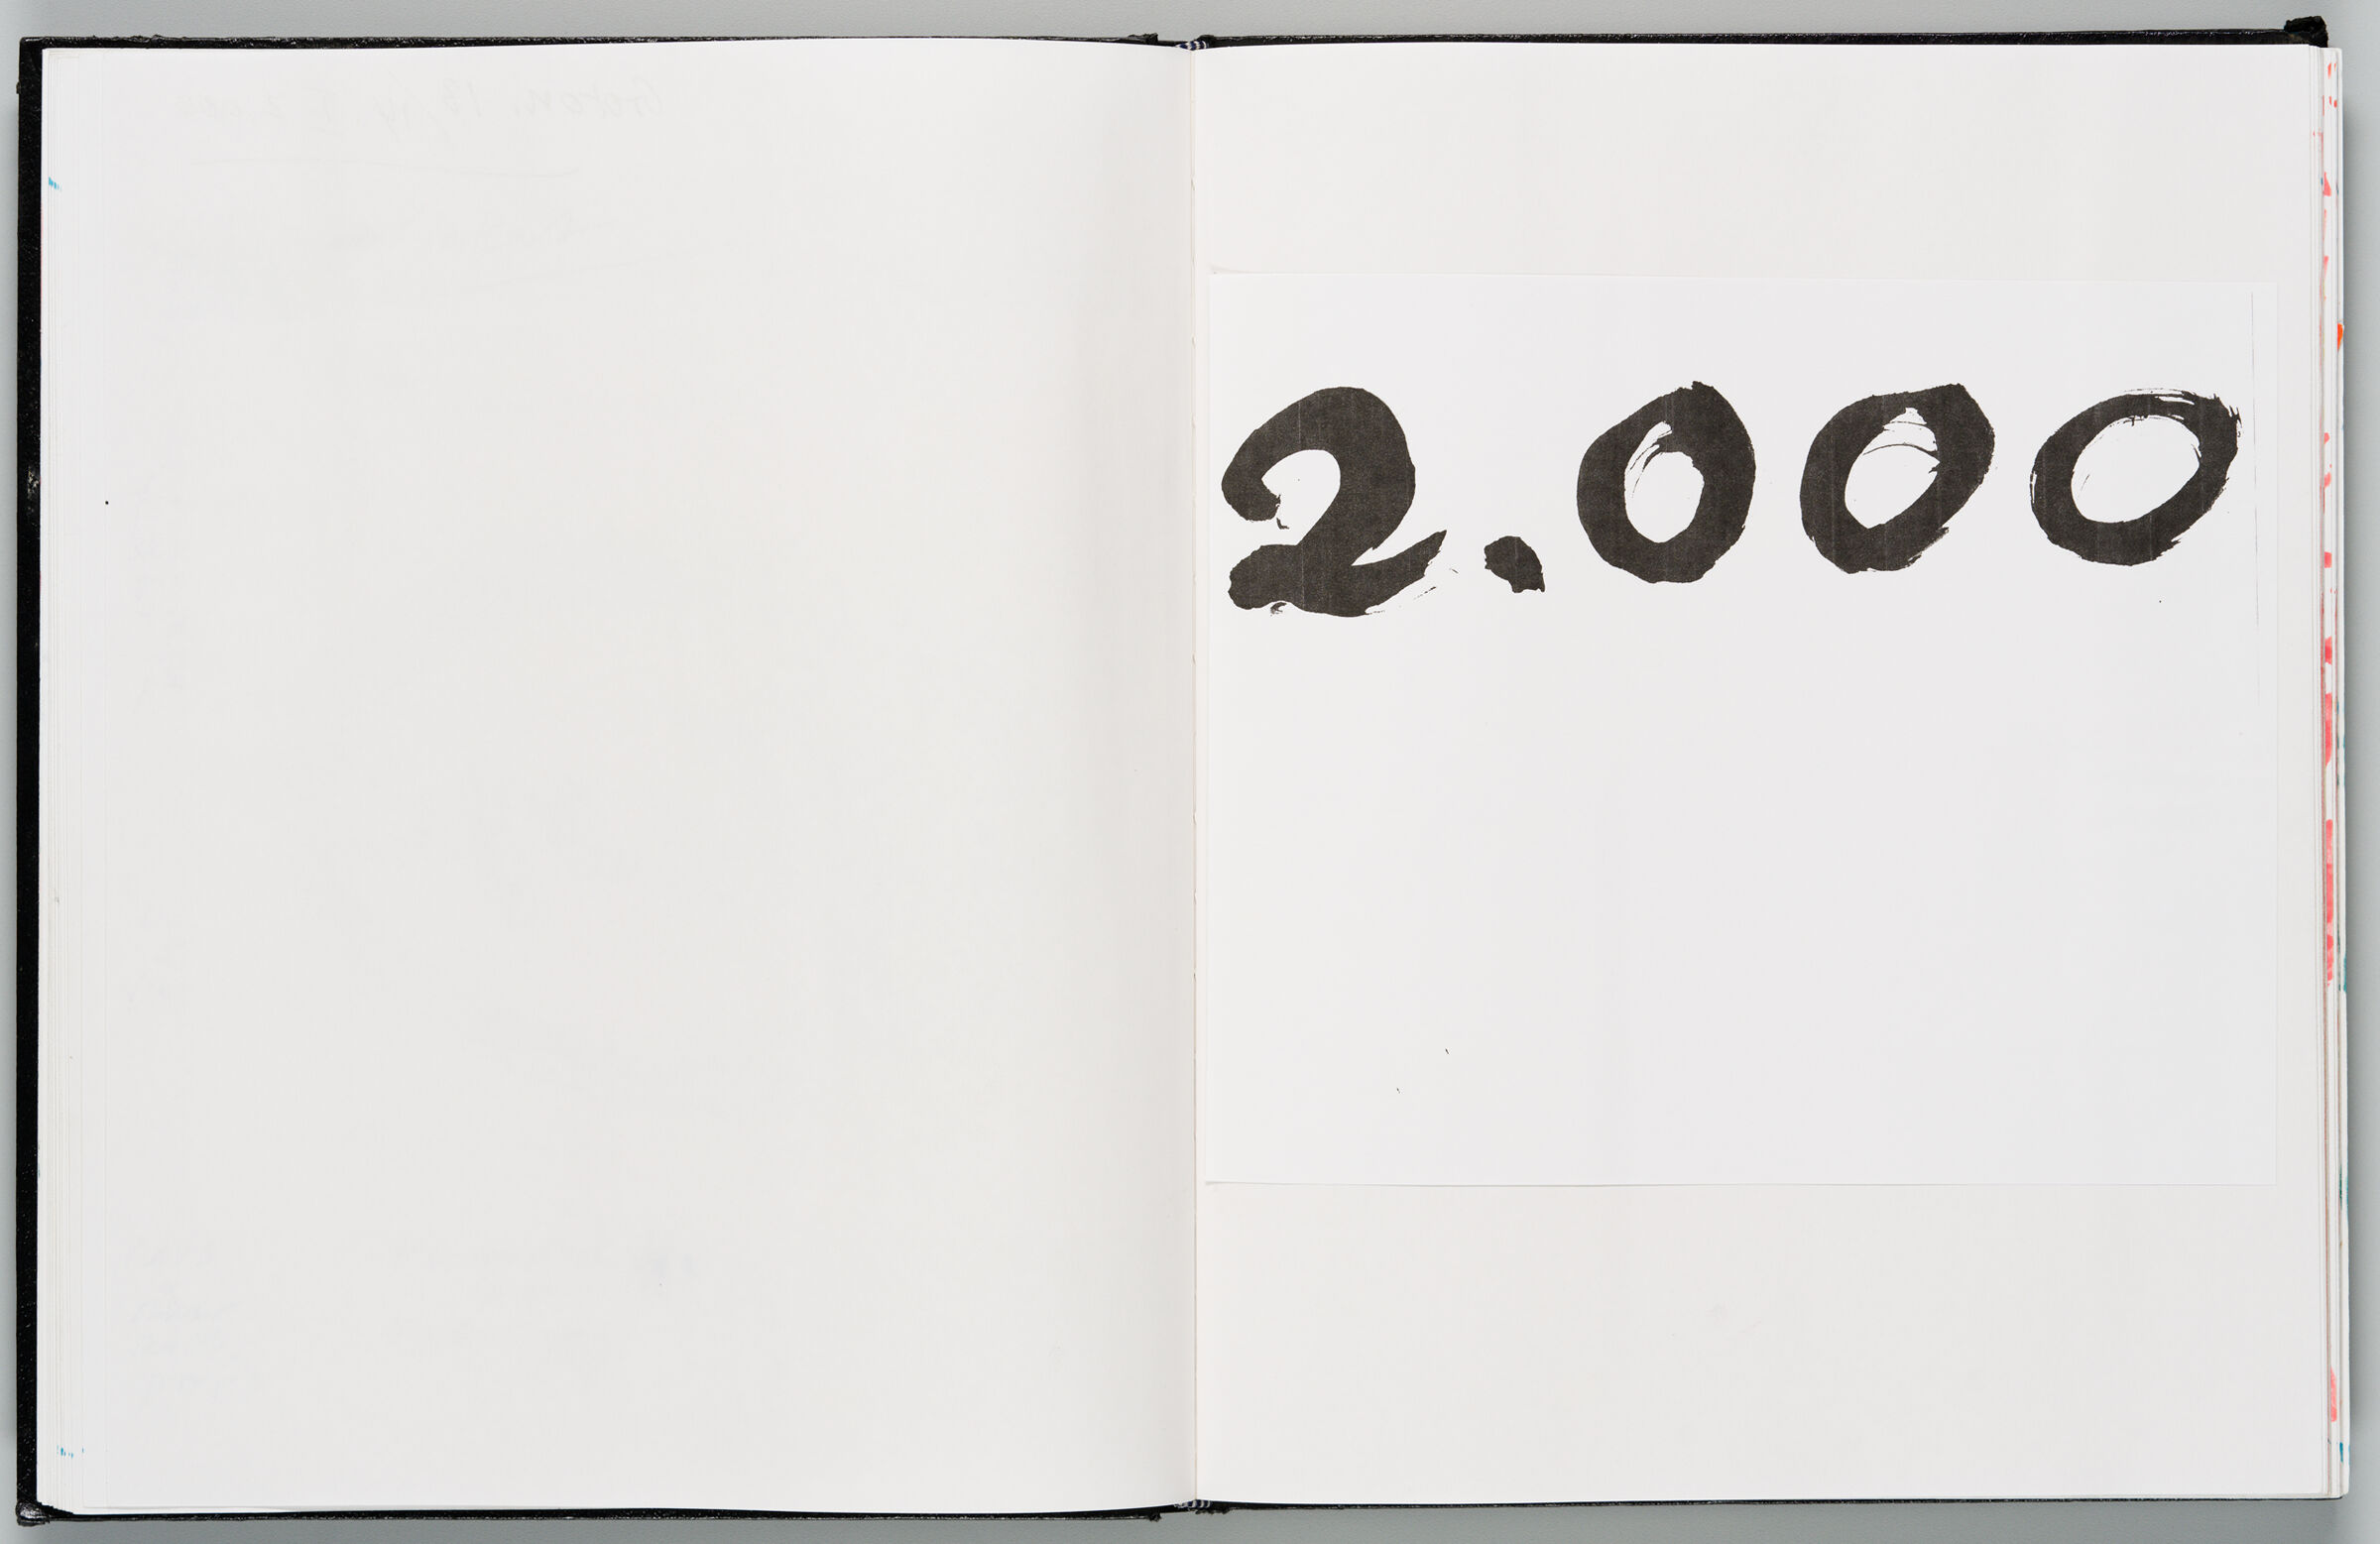 Untitled (Blank, Left Page); Untitled (Adhered Sheet, Right Page)